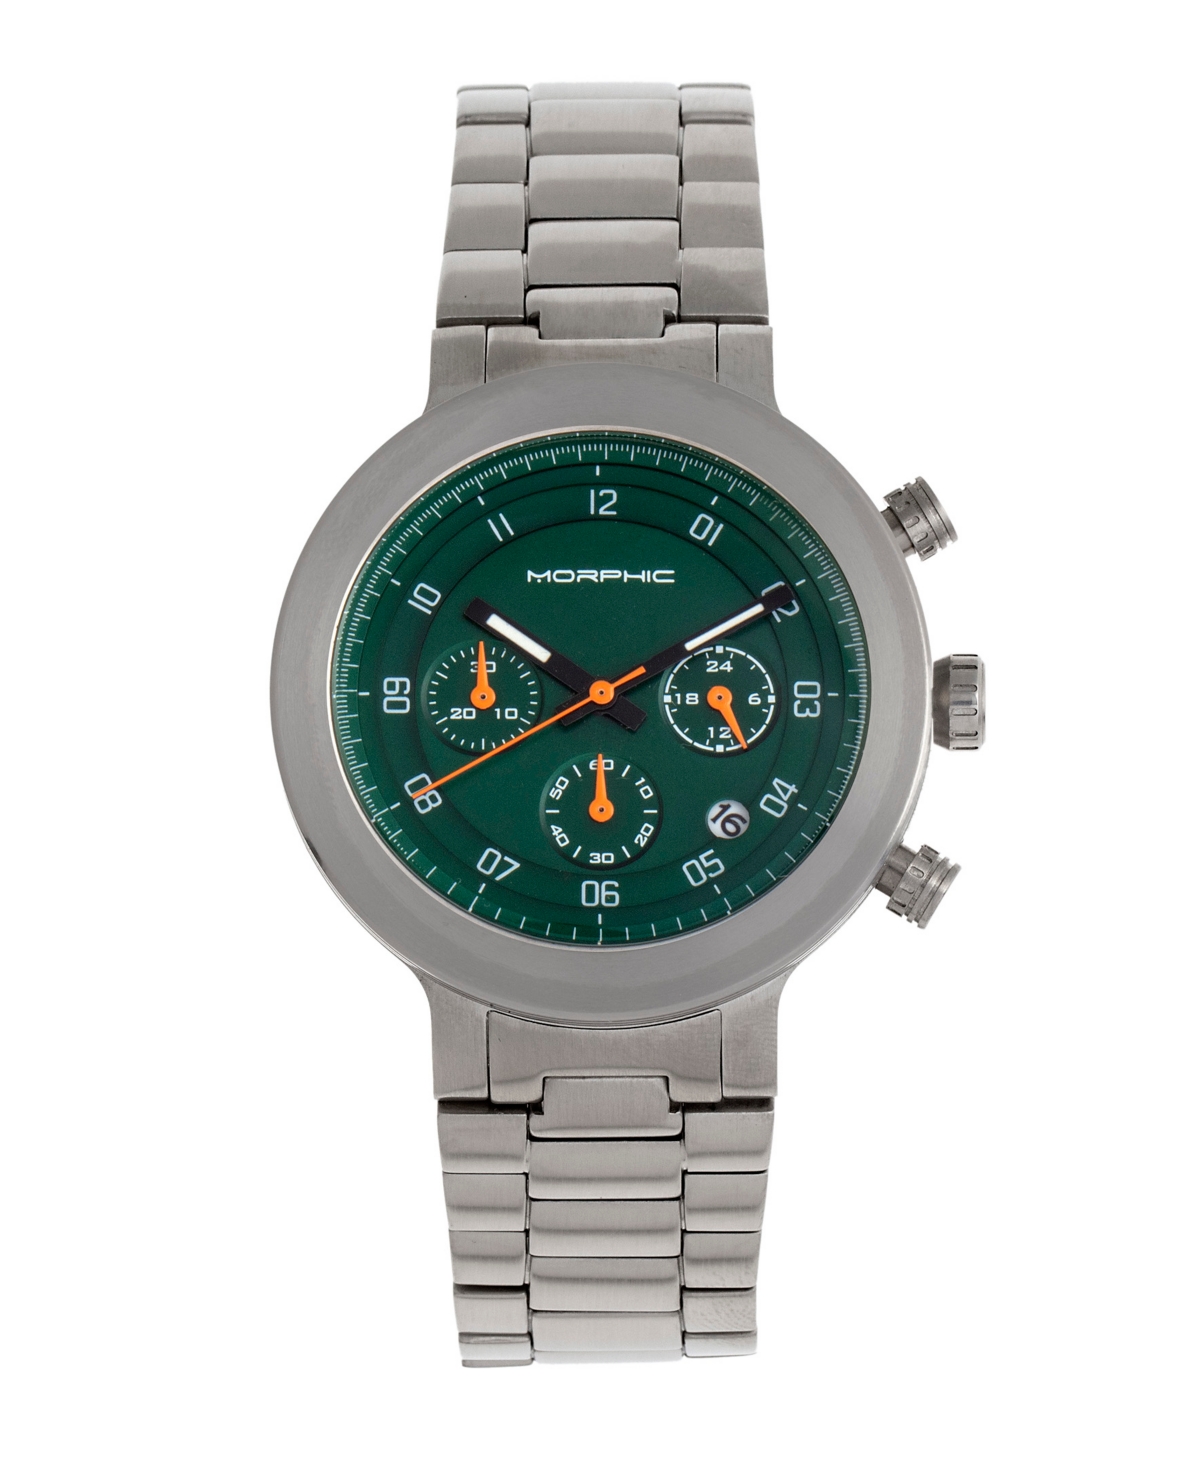 M78 Series Silver-tone or Gold-tone or Rose Gold Bracelet Chronograph Watch, 46mm - Silver-Tone, Green